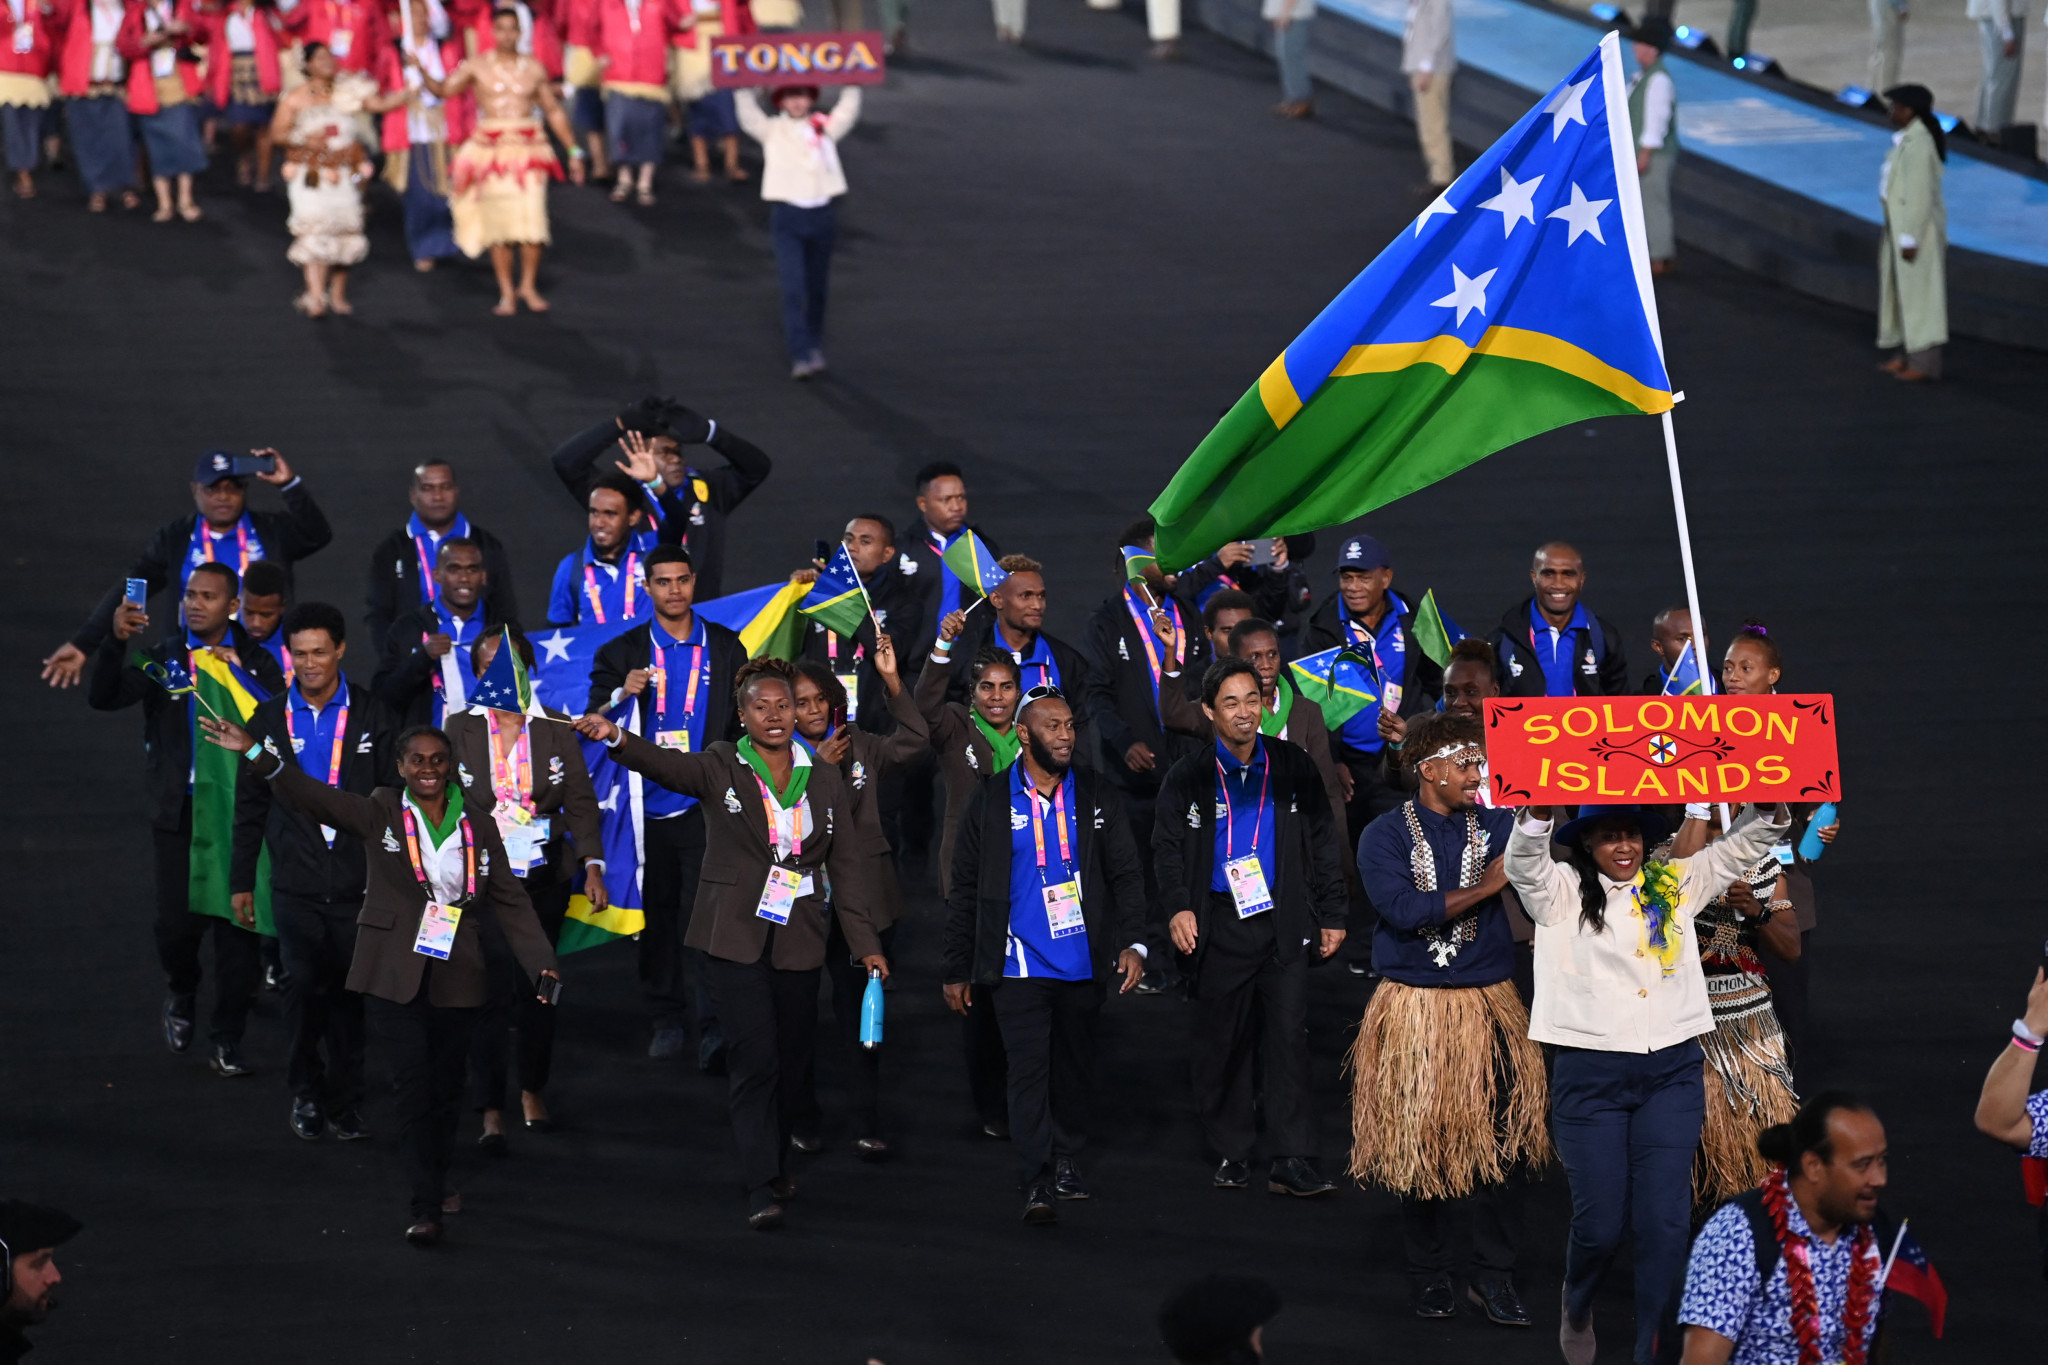 Next year's Pacific Games will be the first on the Solomon Islands ©Getty Images